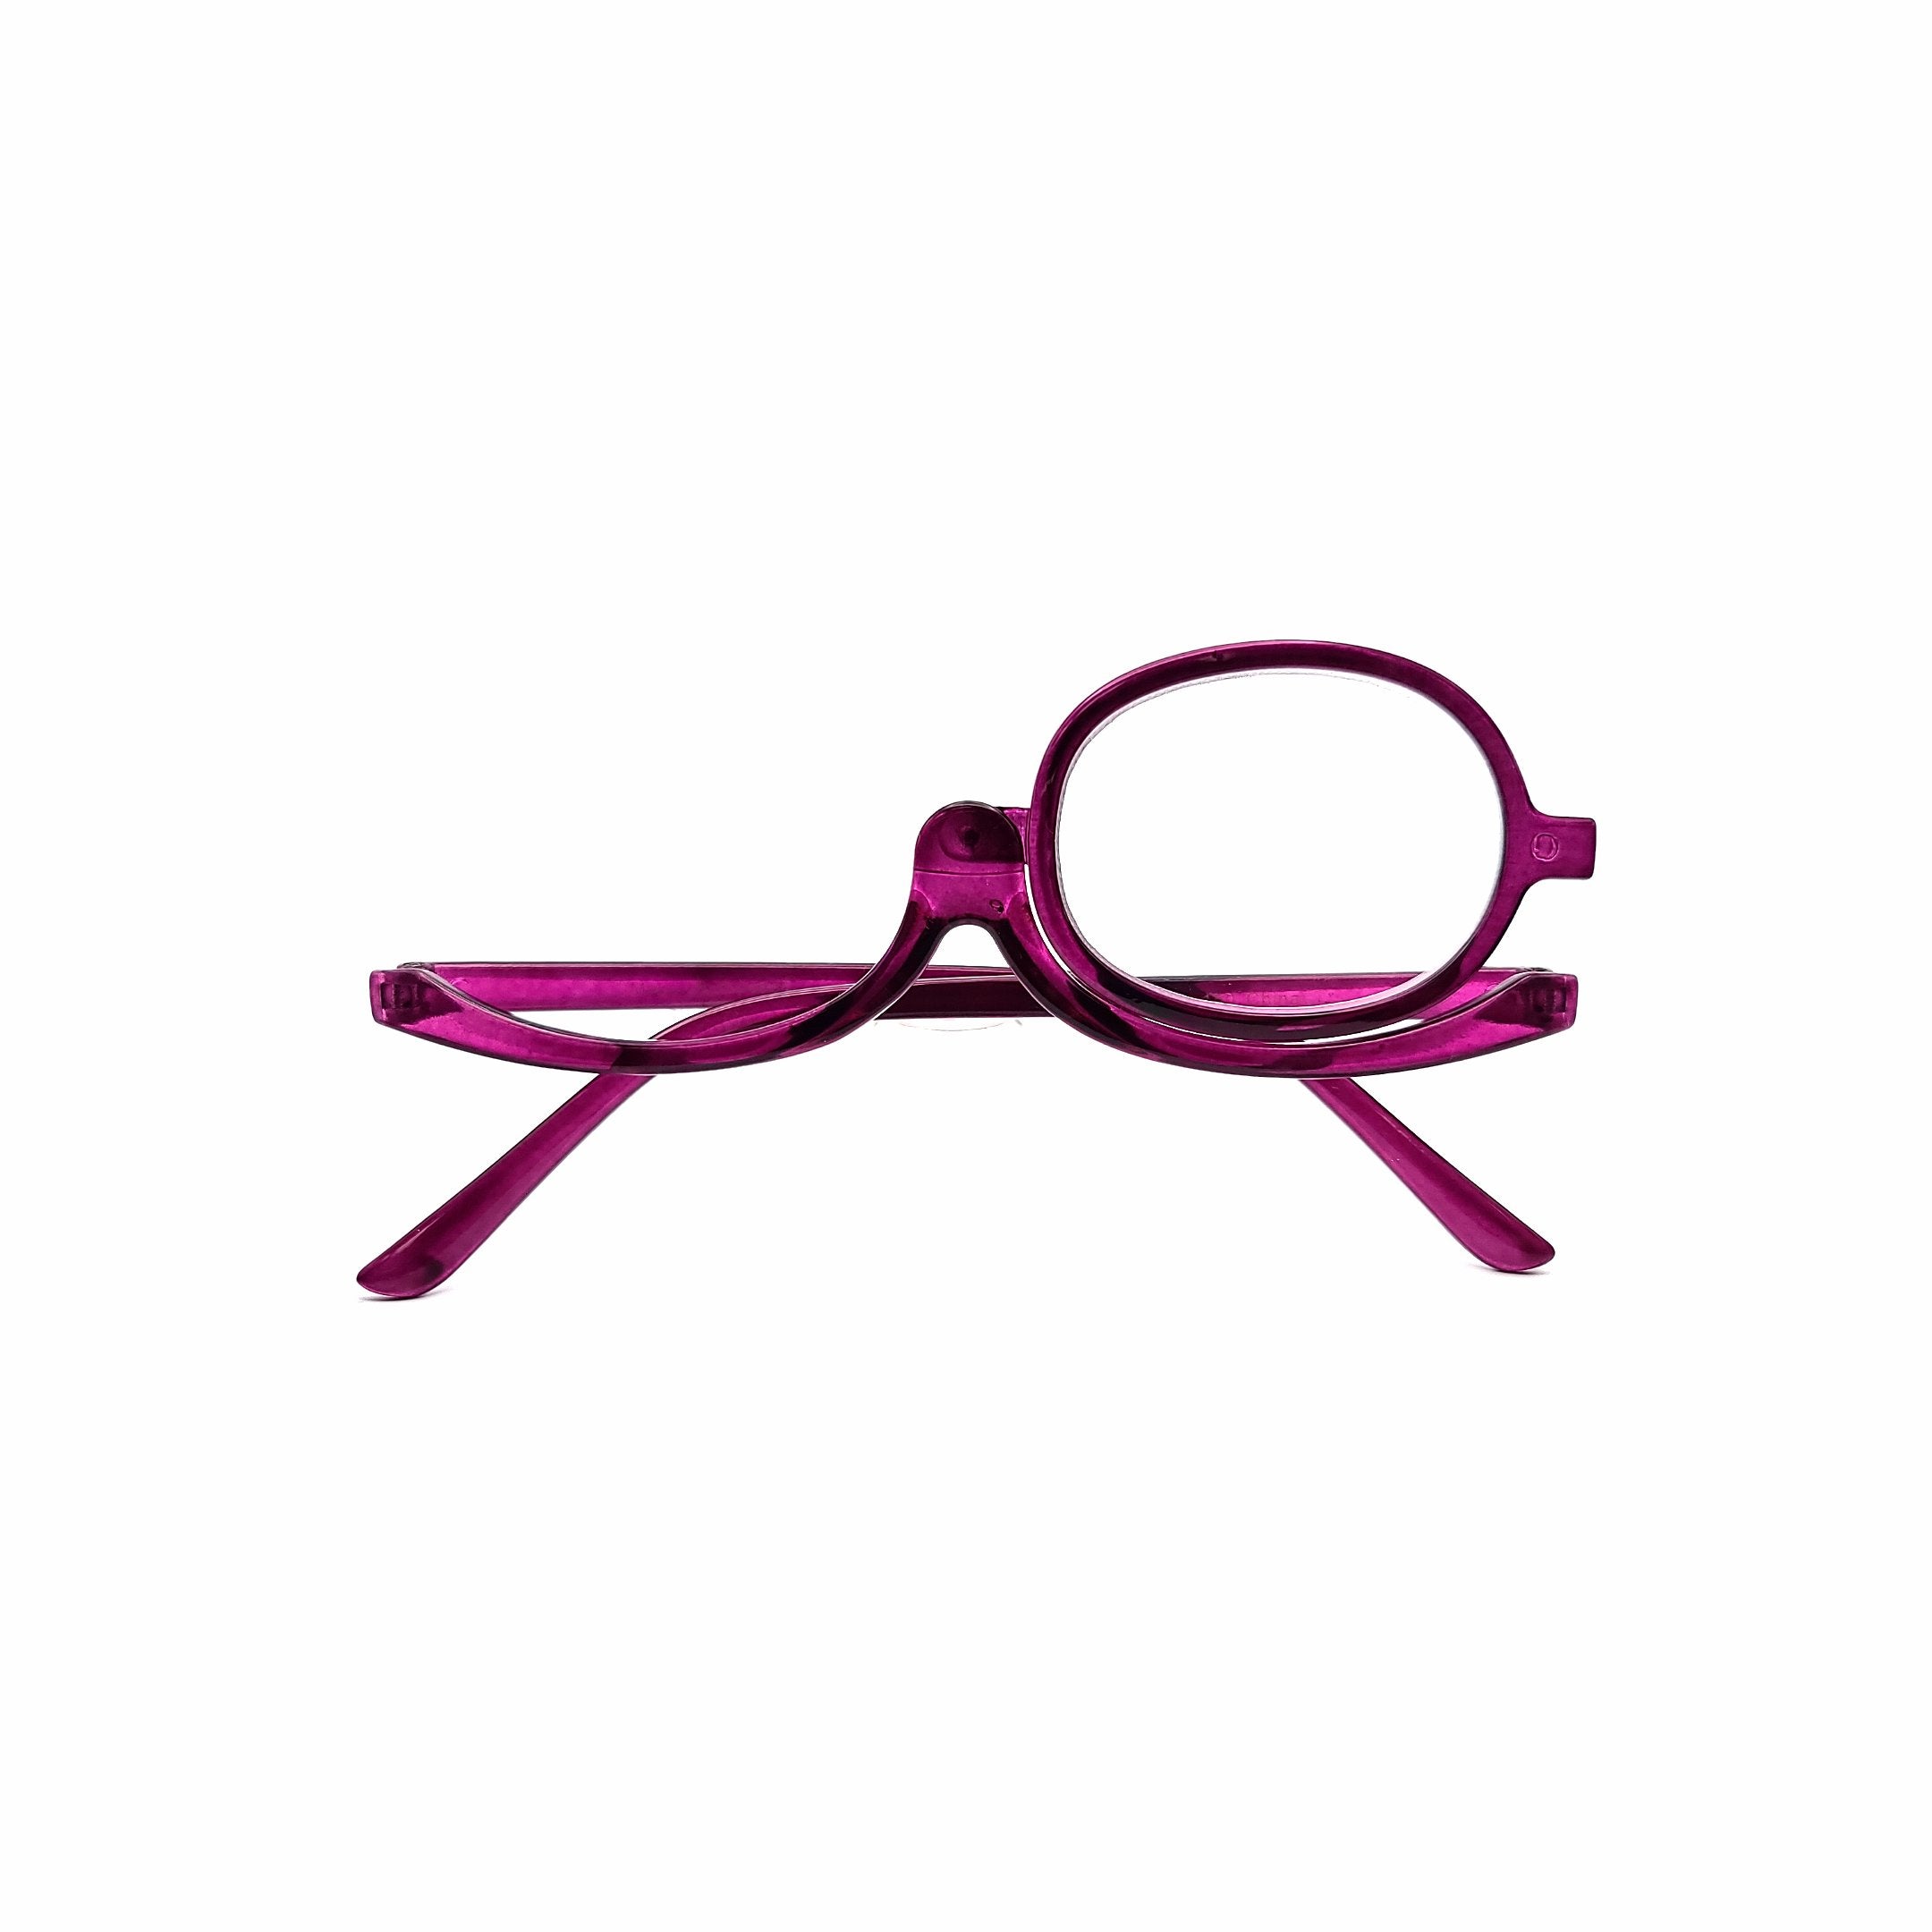 Magnifying Glasses for Reading, High Magnification One Power Magnifier Readers (5.50)